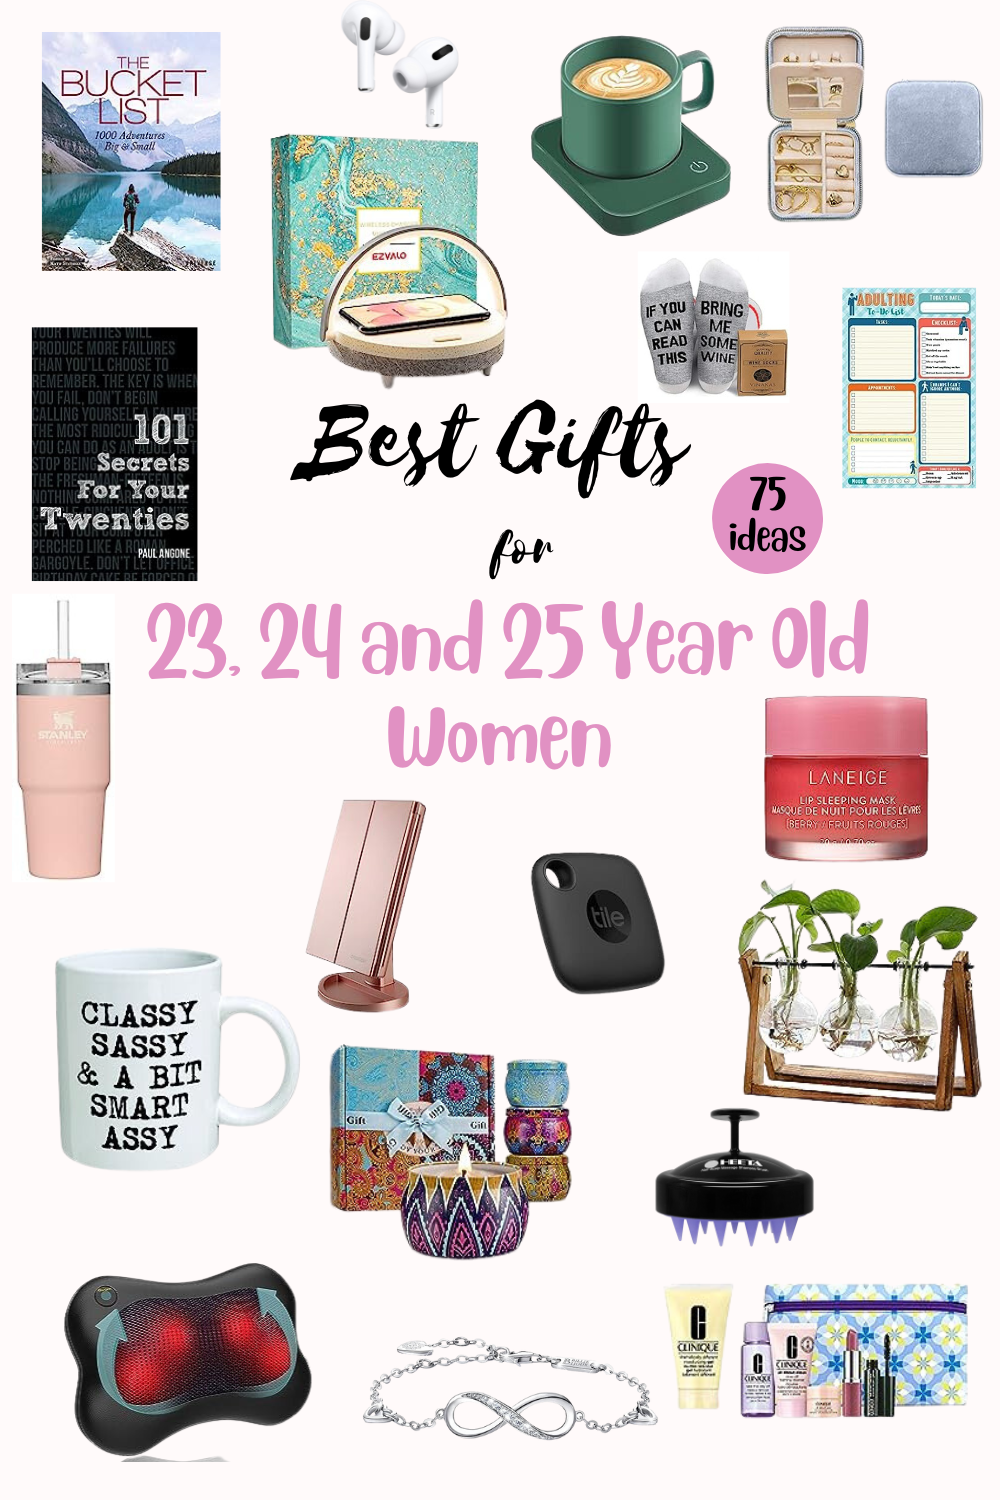 Gifts for 23, 24 and 25 year old women - Best Gifts For Women in